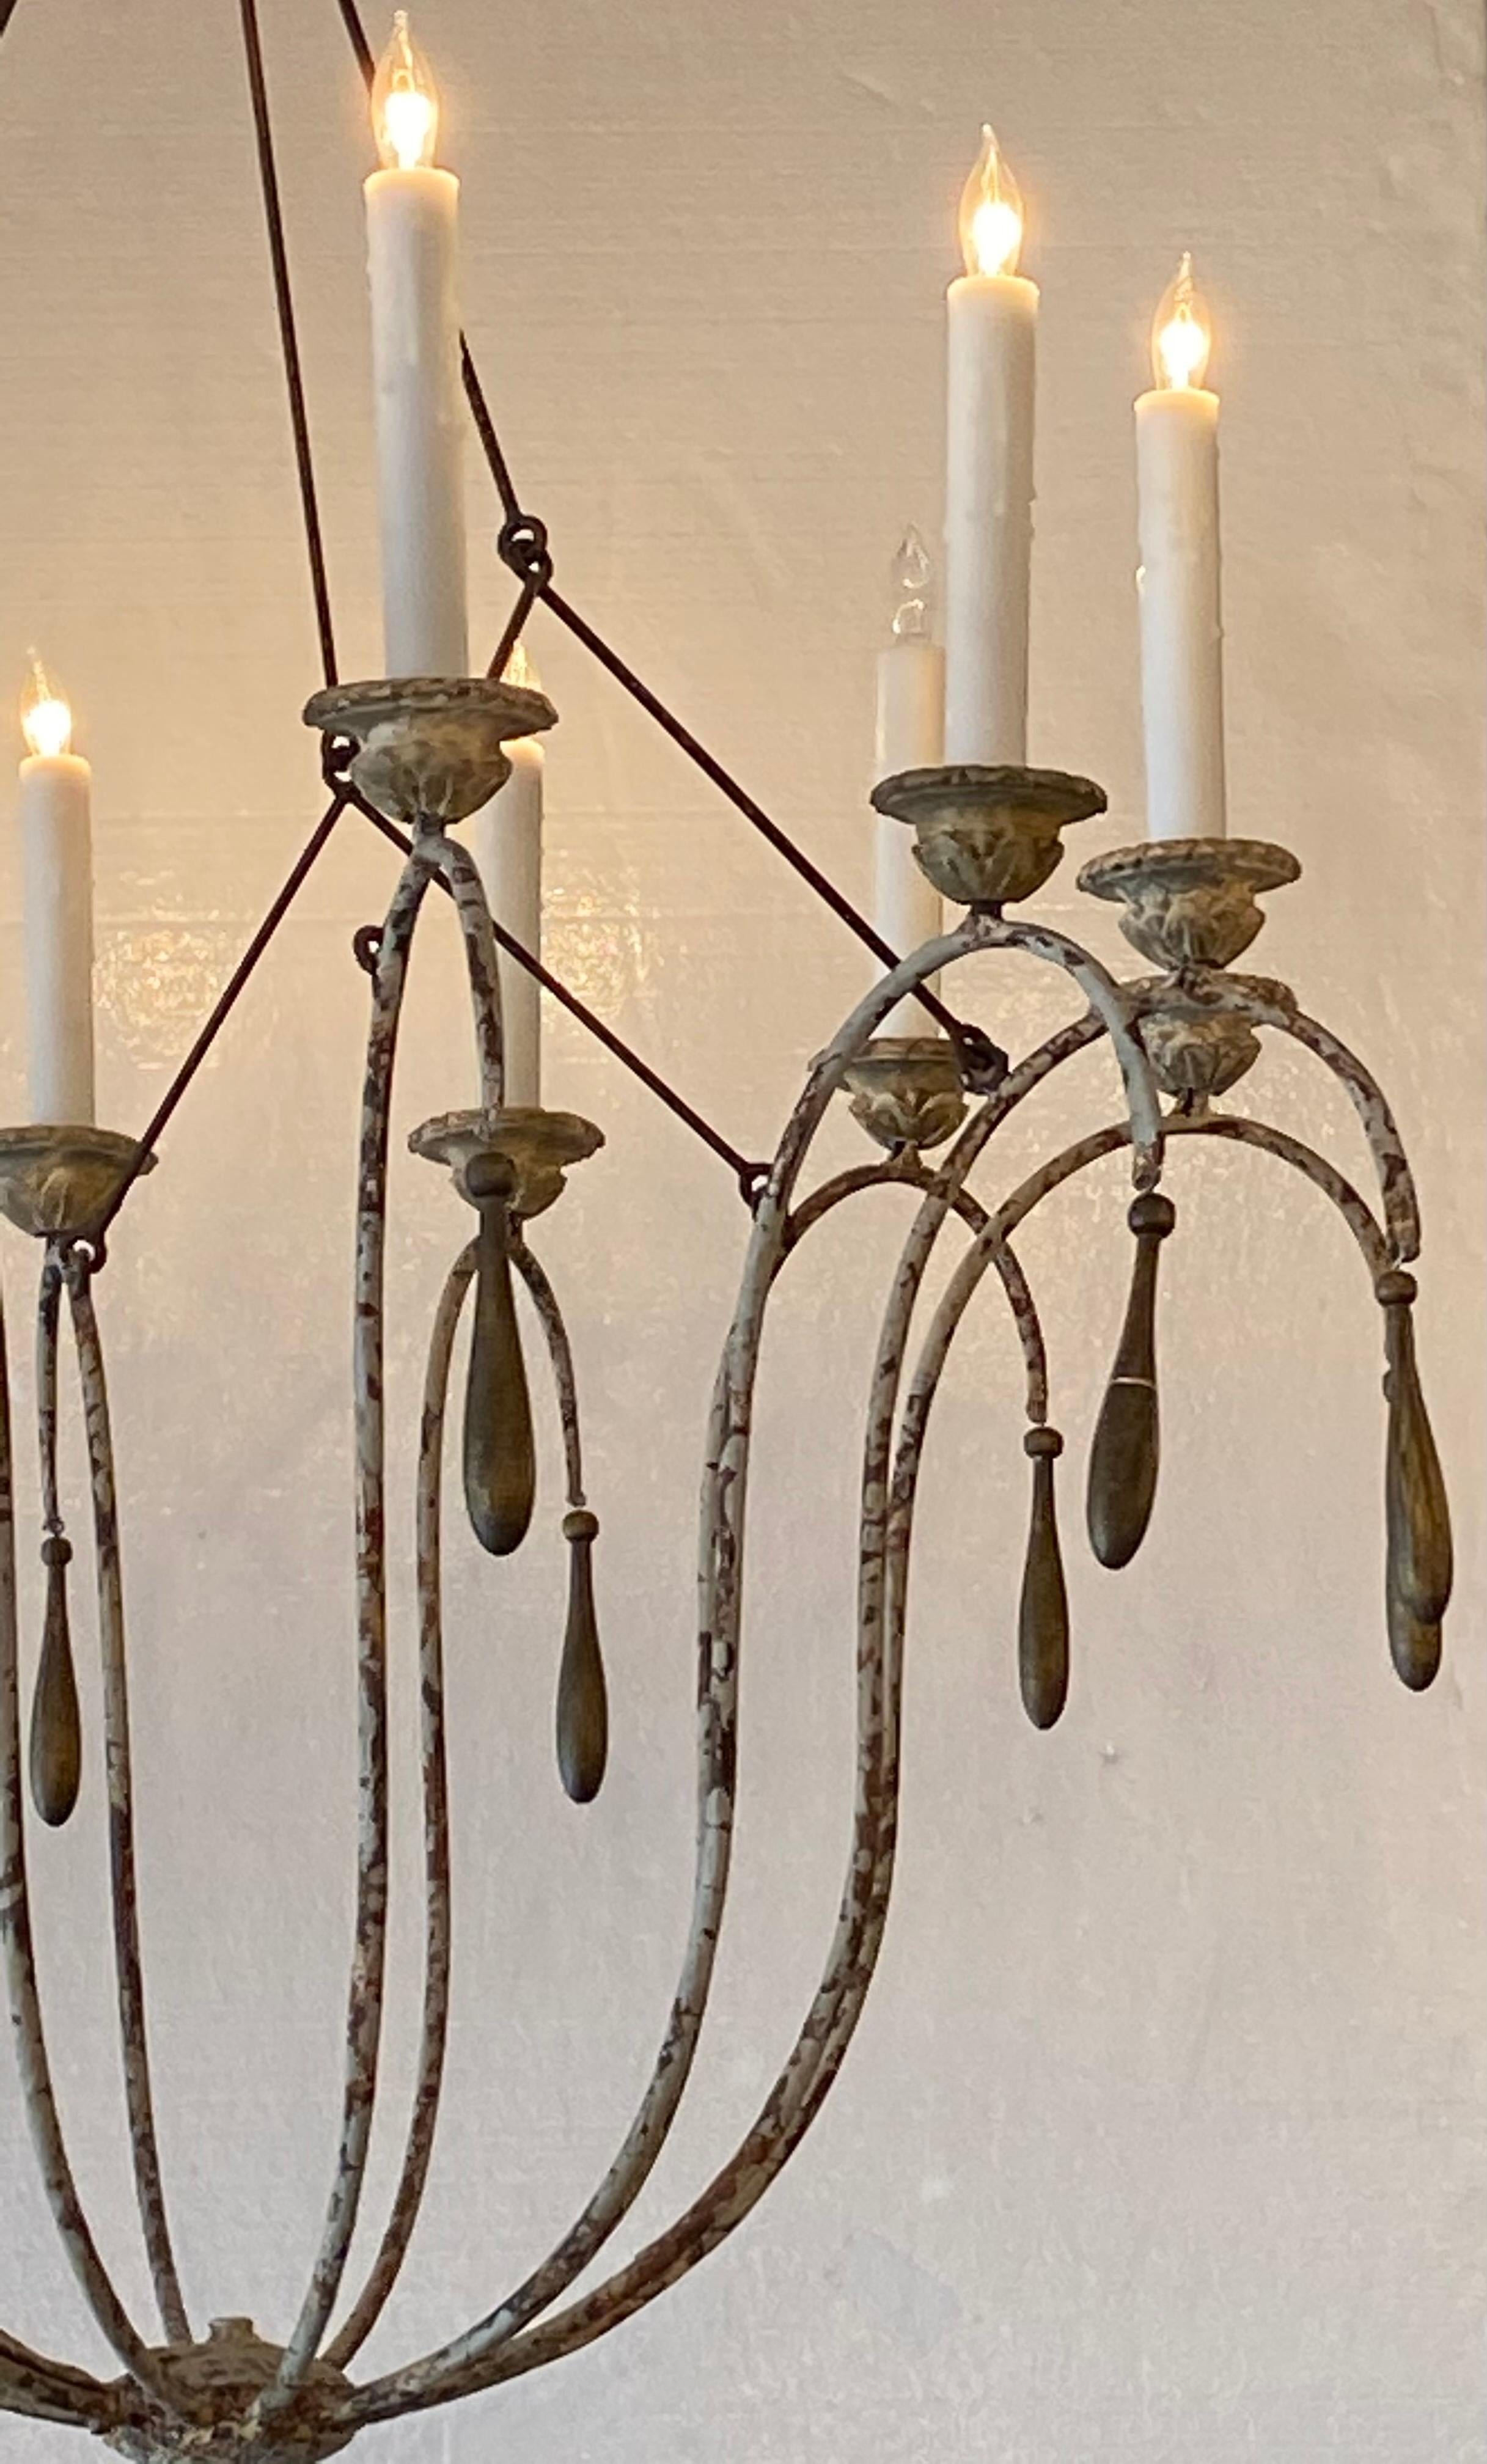 French Contry antique wood chandelier, hand crafted, in excellent conditions. 12 lights with 12 -6